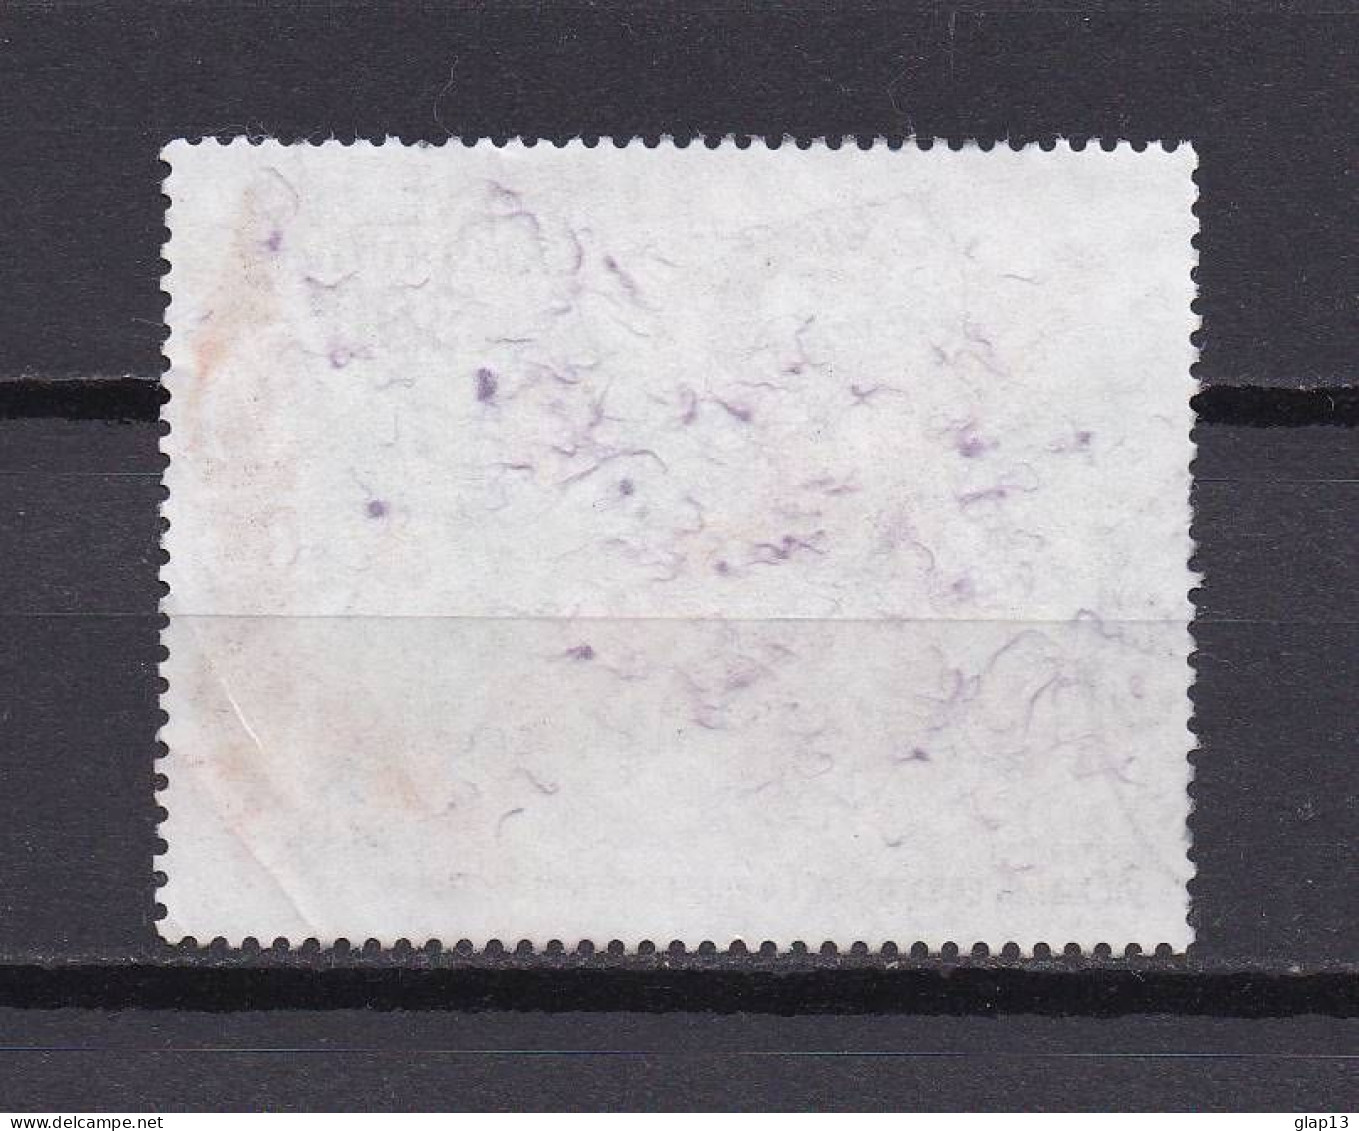 NOUVELLE-CALEDONIE 1991 TIMBRE N°620 OBLITERE DRAGON - Used Stamps